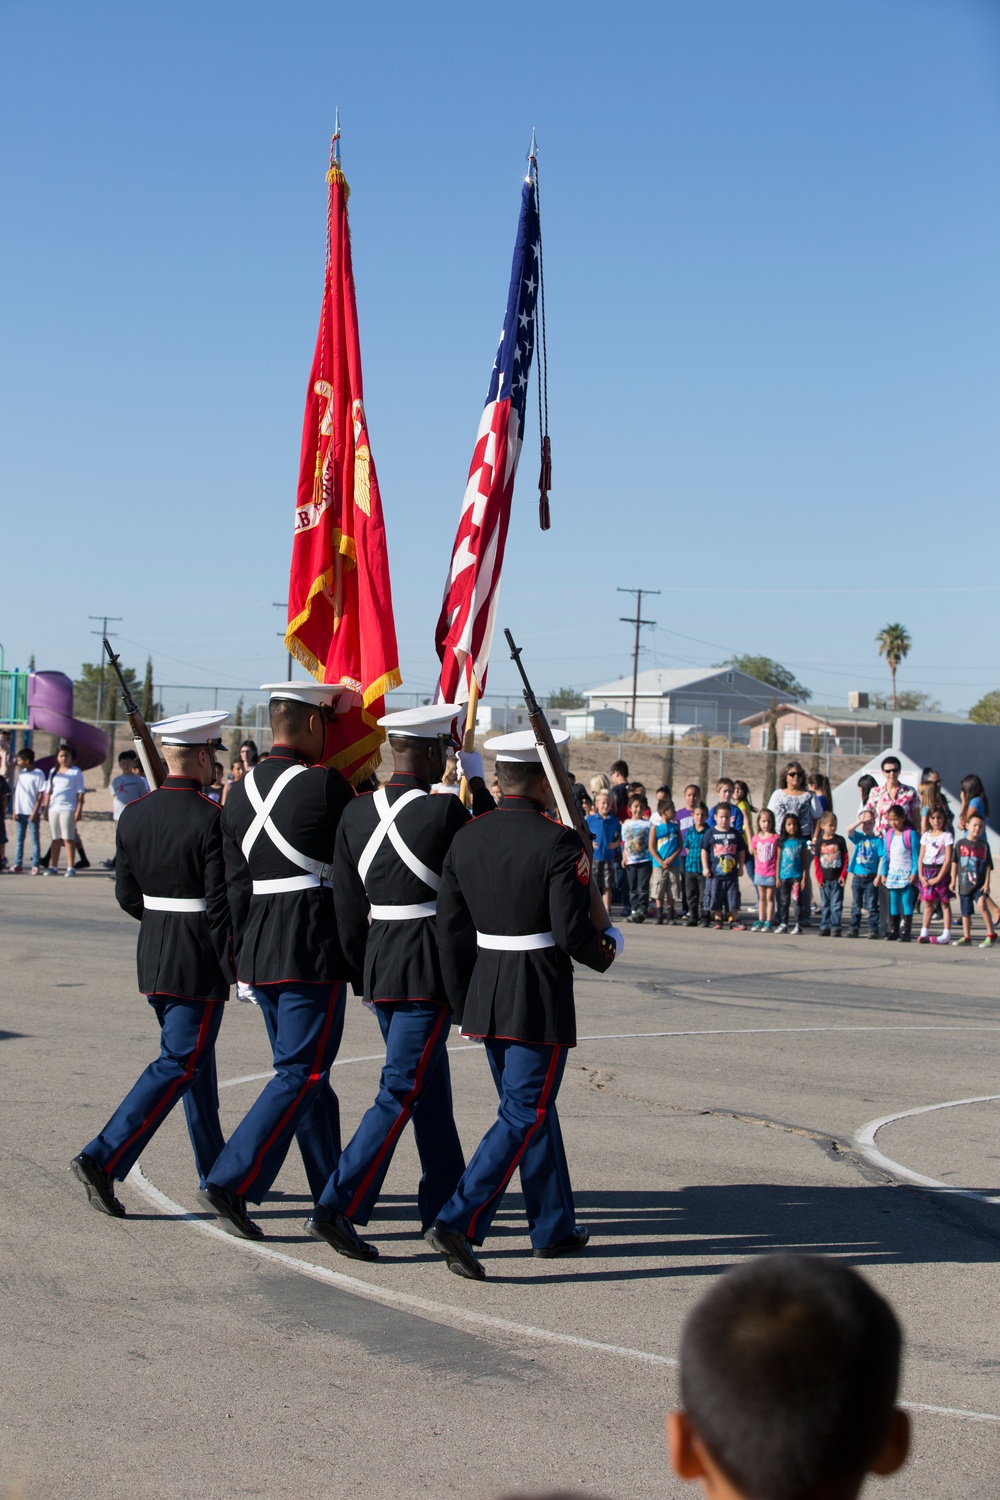 MCLB Barstow's Walking Color Guard